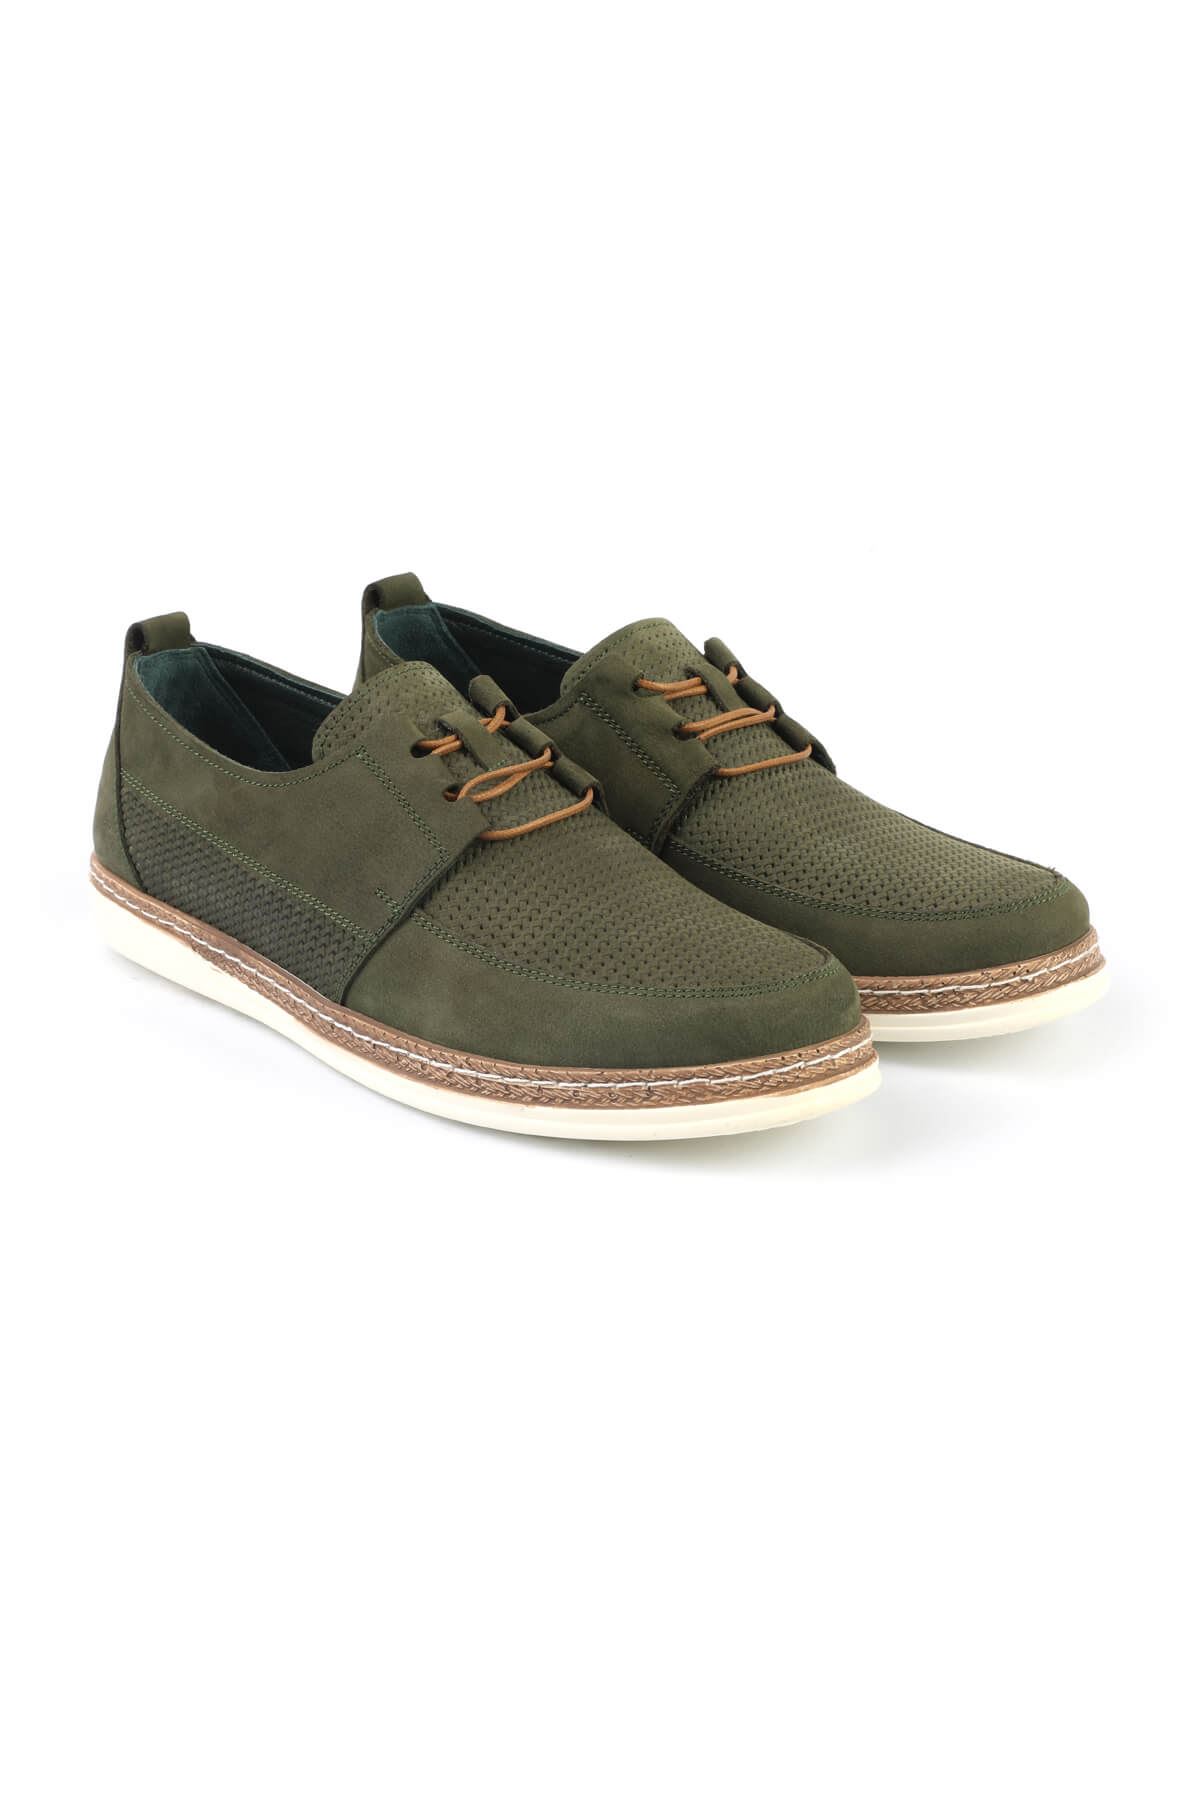 Libero C623 Green Loafer Shoes